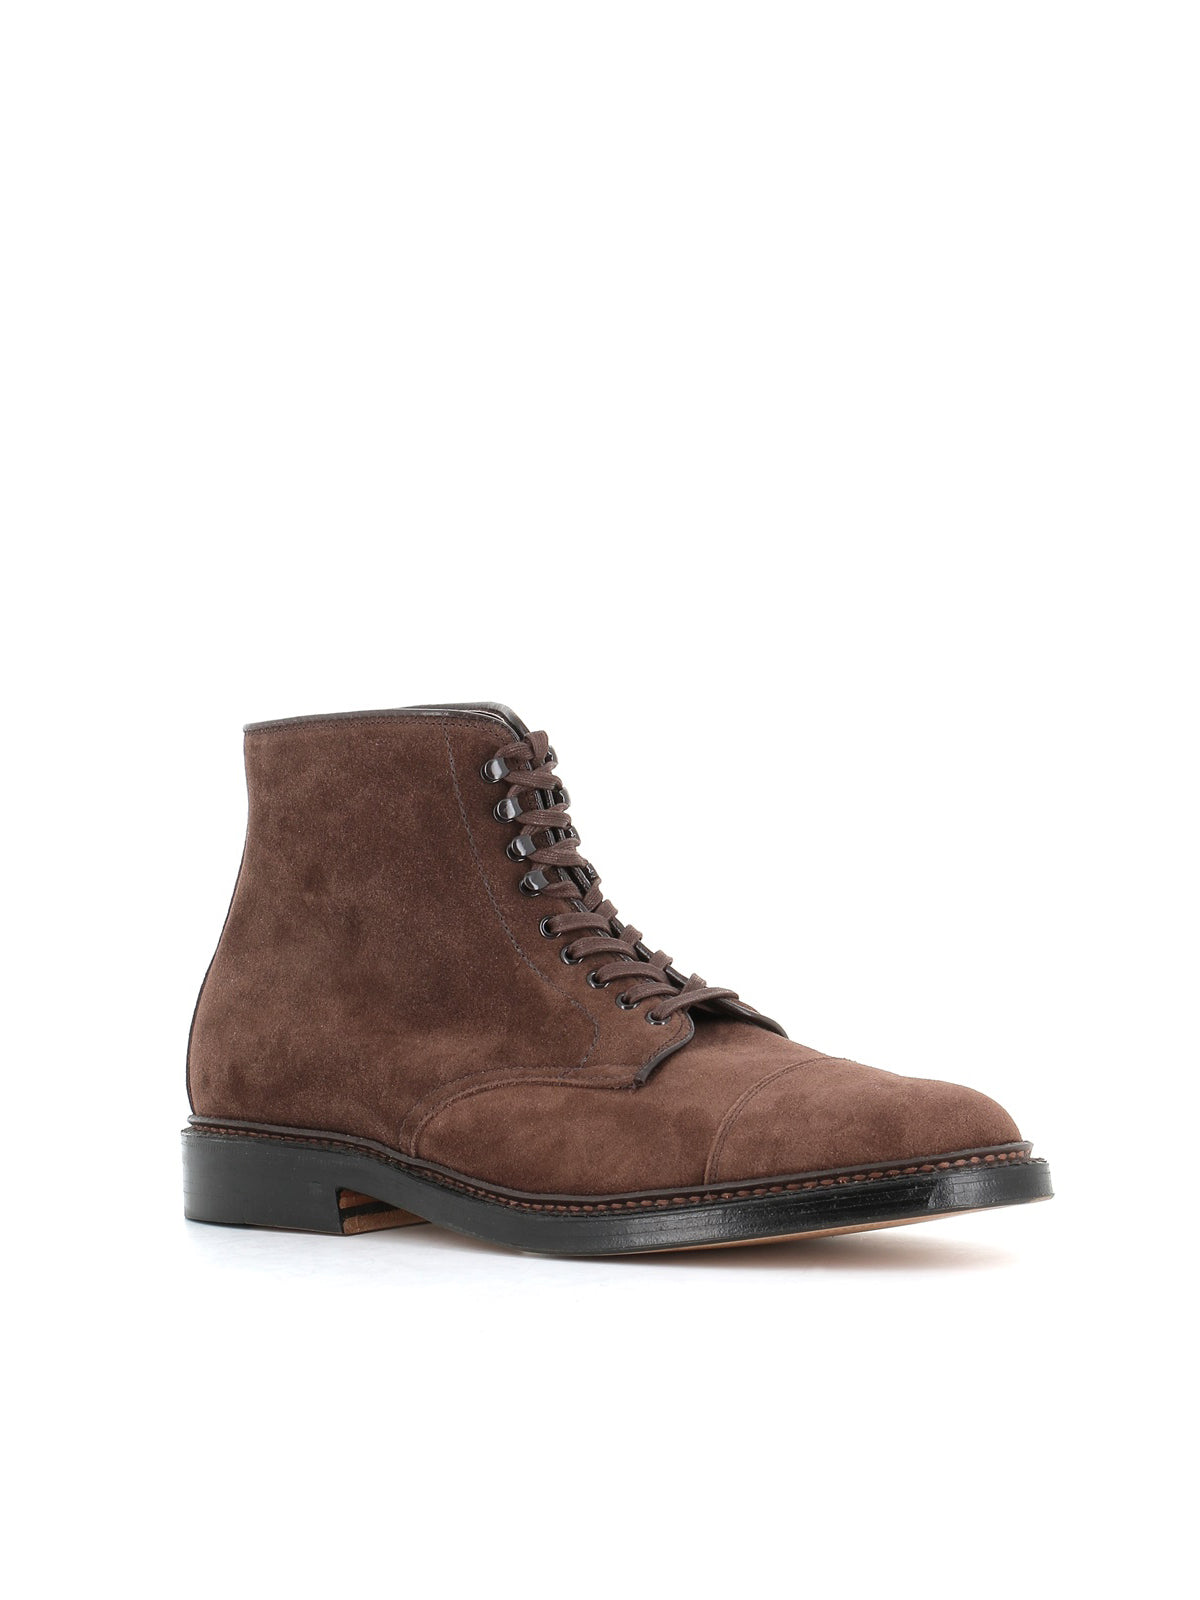  Lace-up Boot 4081 Hy Alden Uomo Marrone - 3